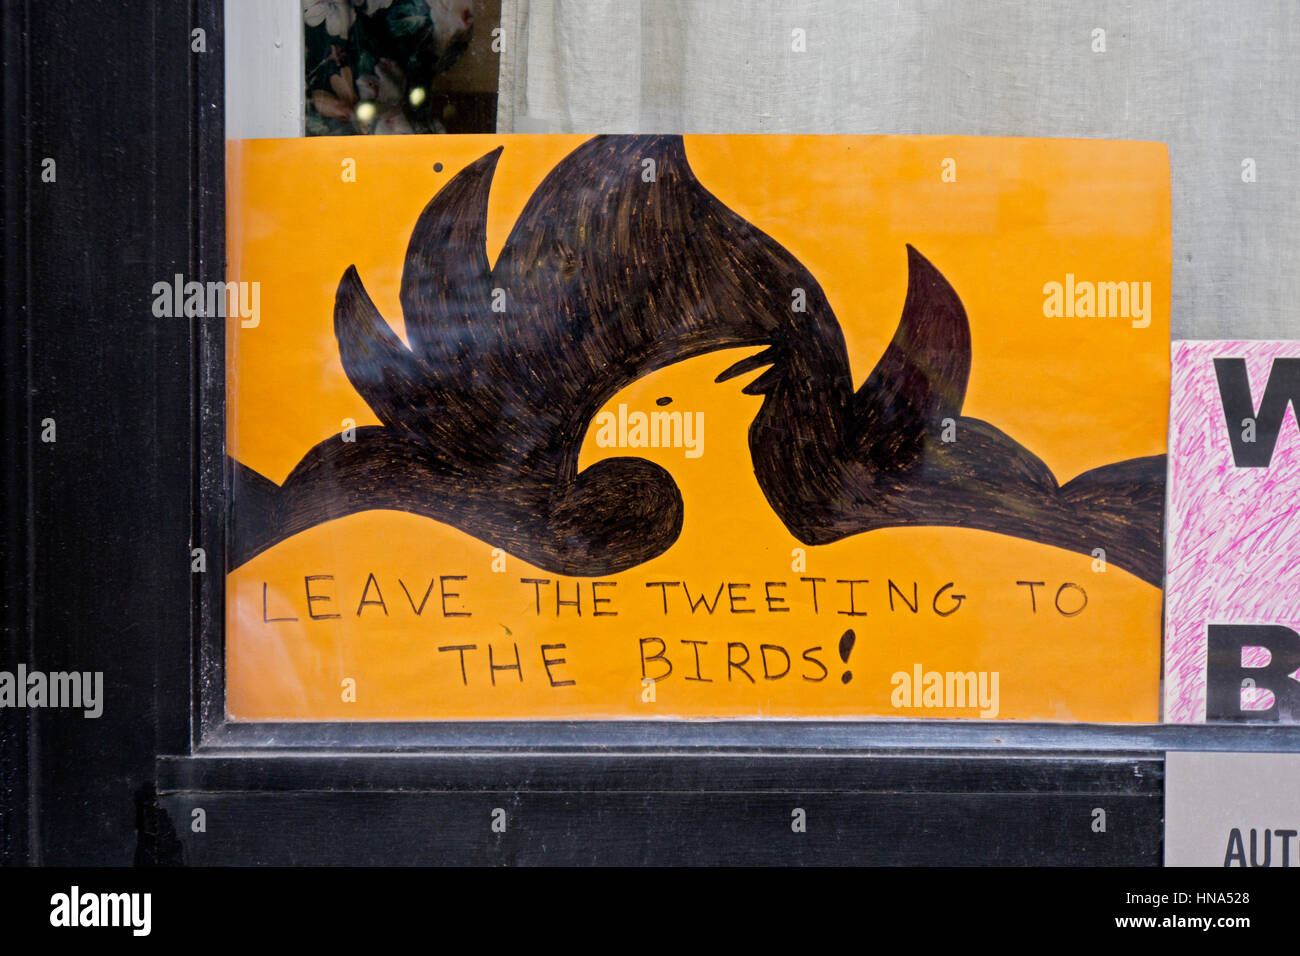 A sign in an East Village shop window deploring President Trump to stop tweeting and leave tweeting to the birds. Greenwich Village, New York City. Stock Photo